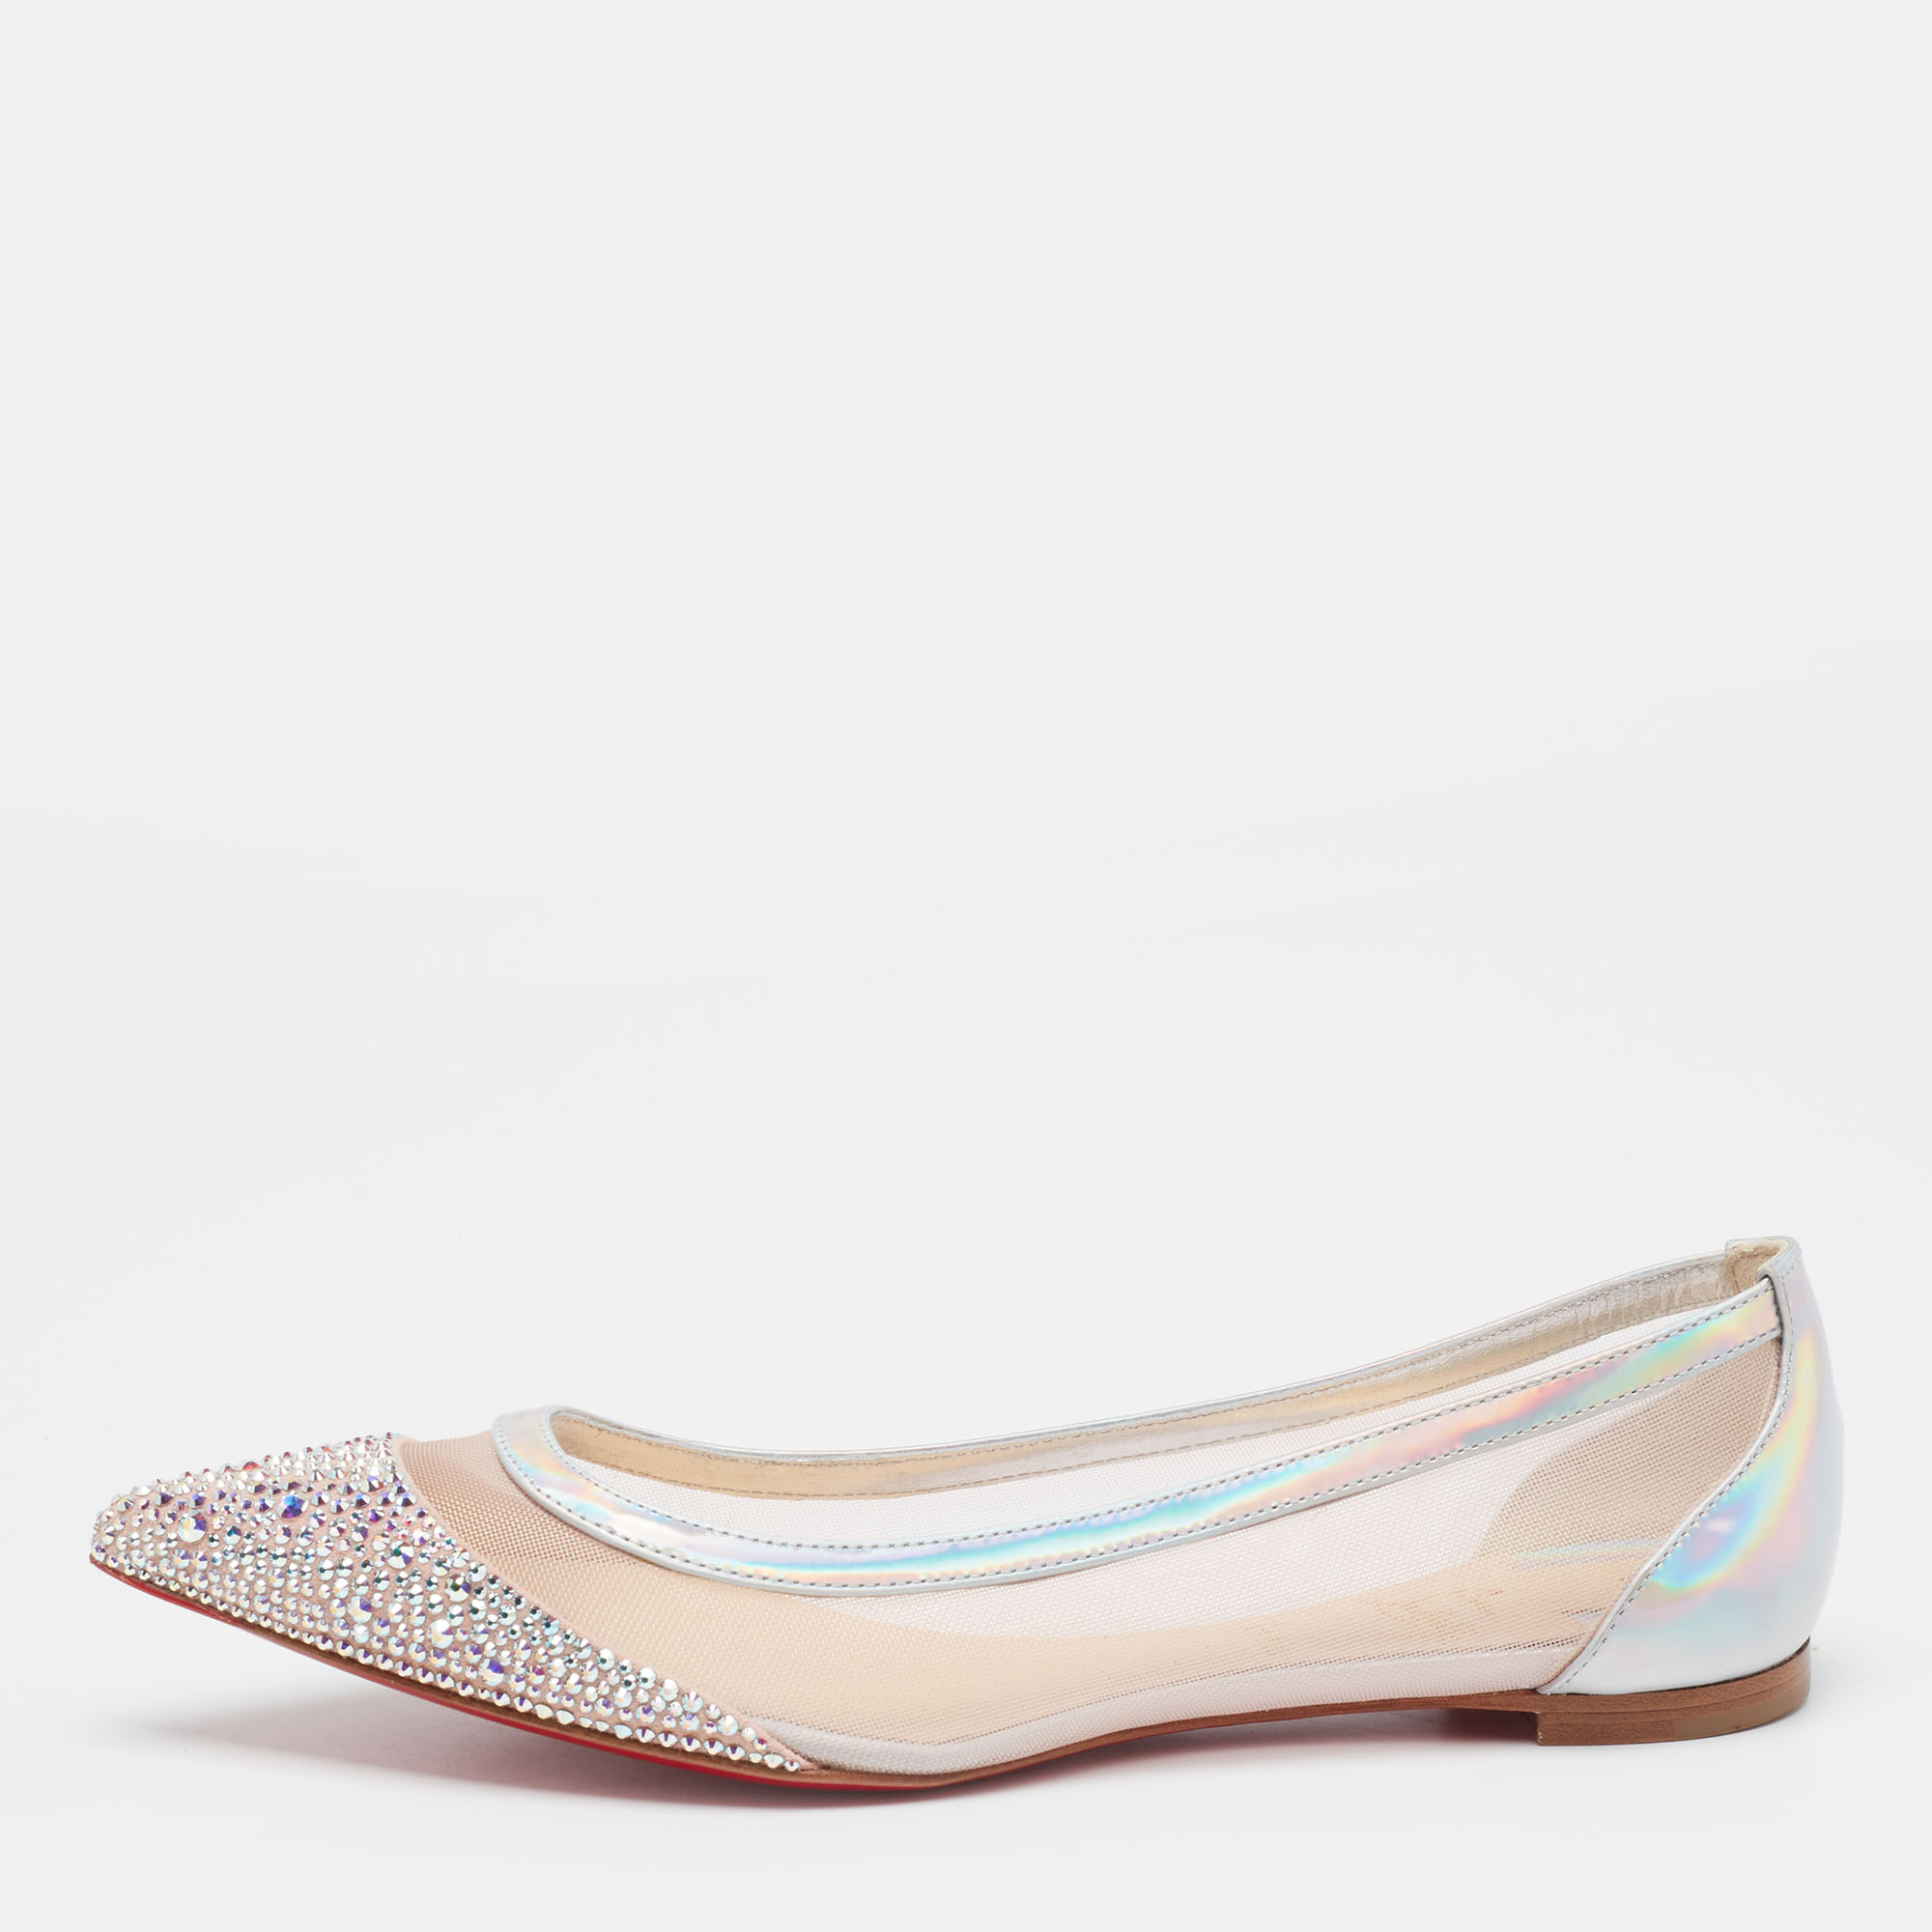 Light Pink Mesh, Iridescent Leather And Suede Galativi Strass Ballet Flats